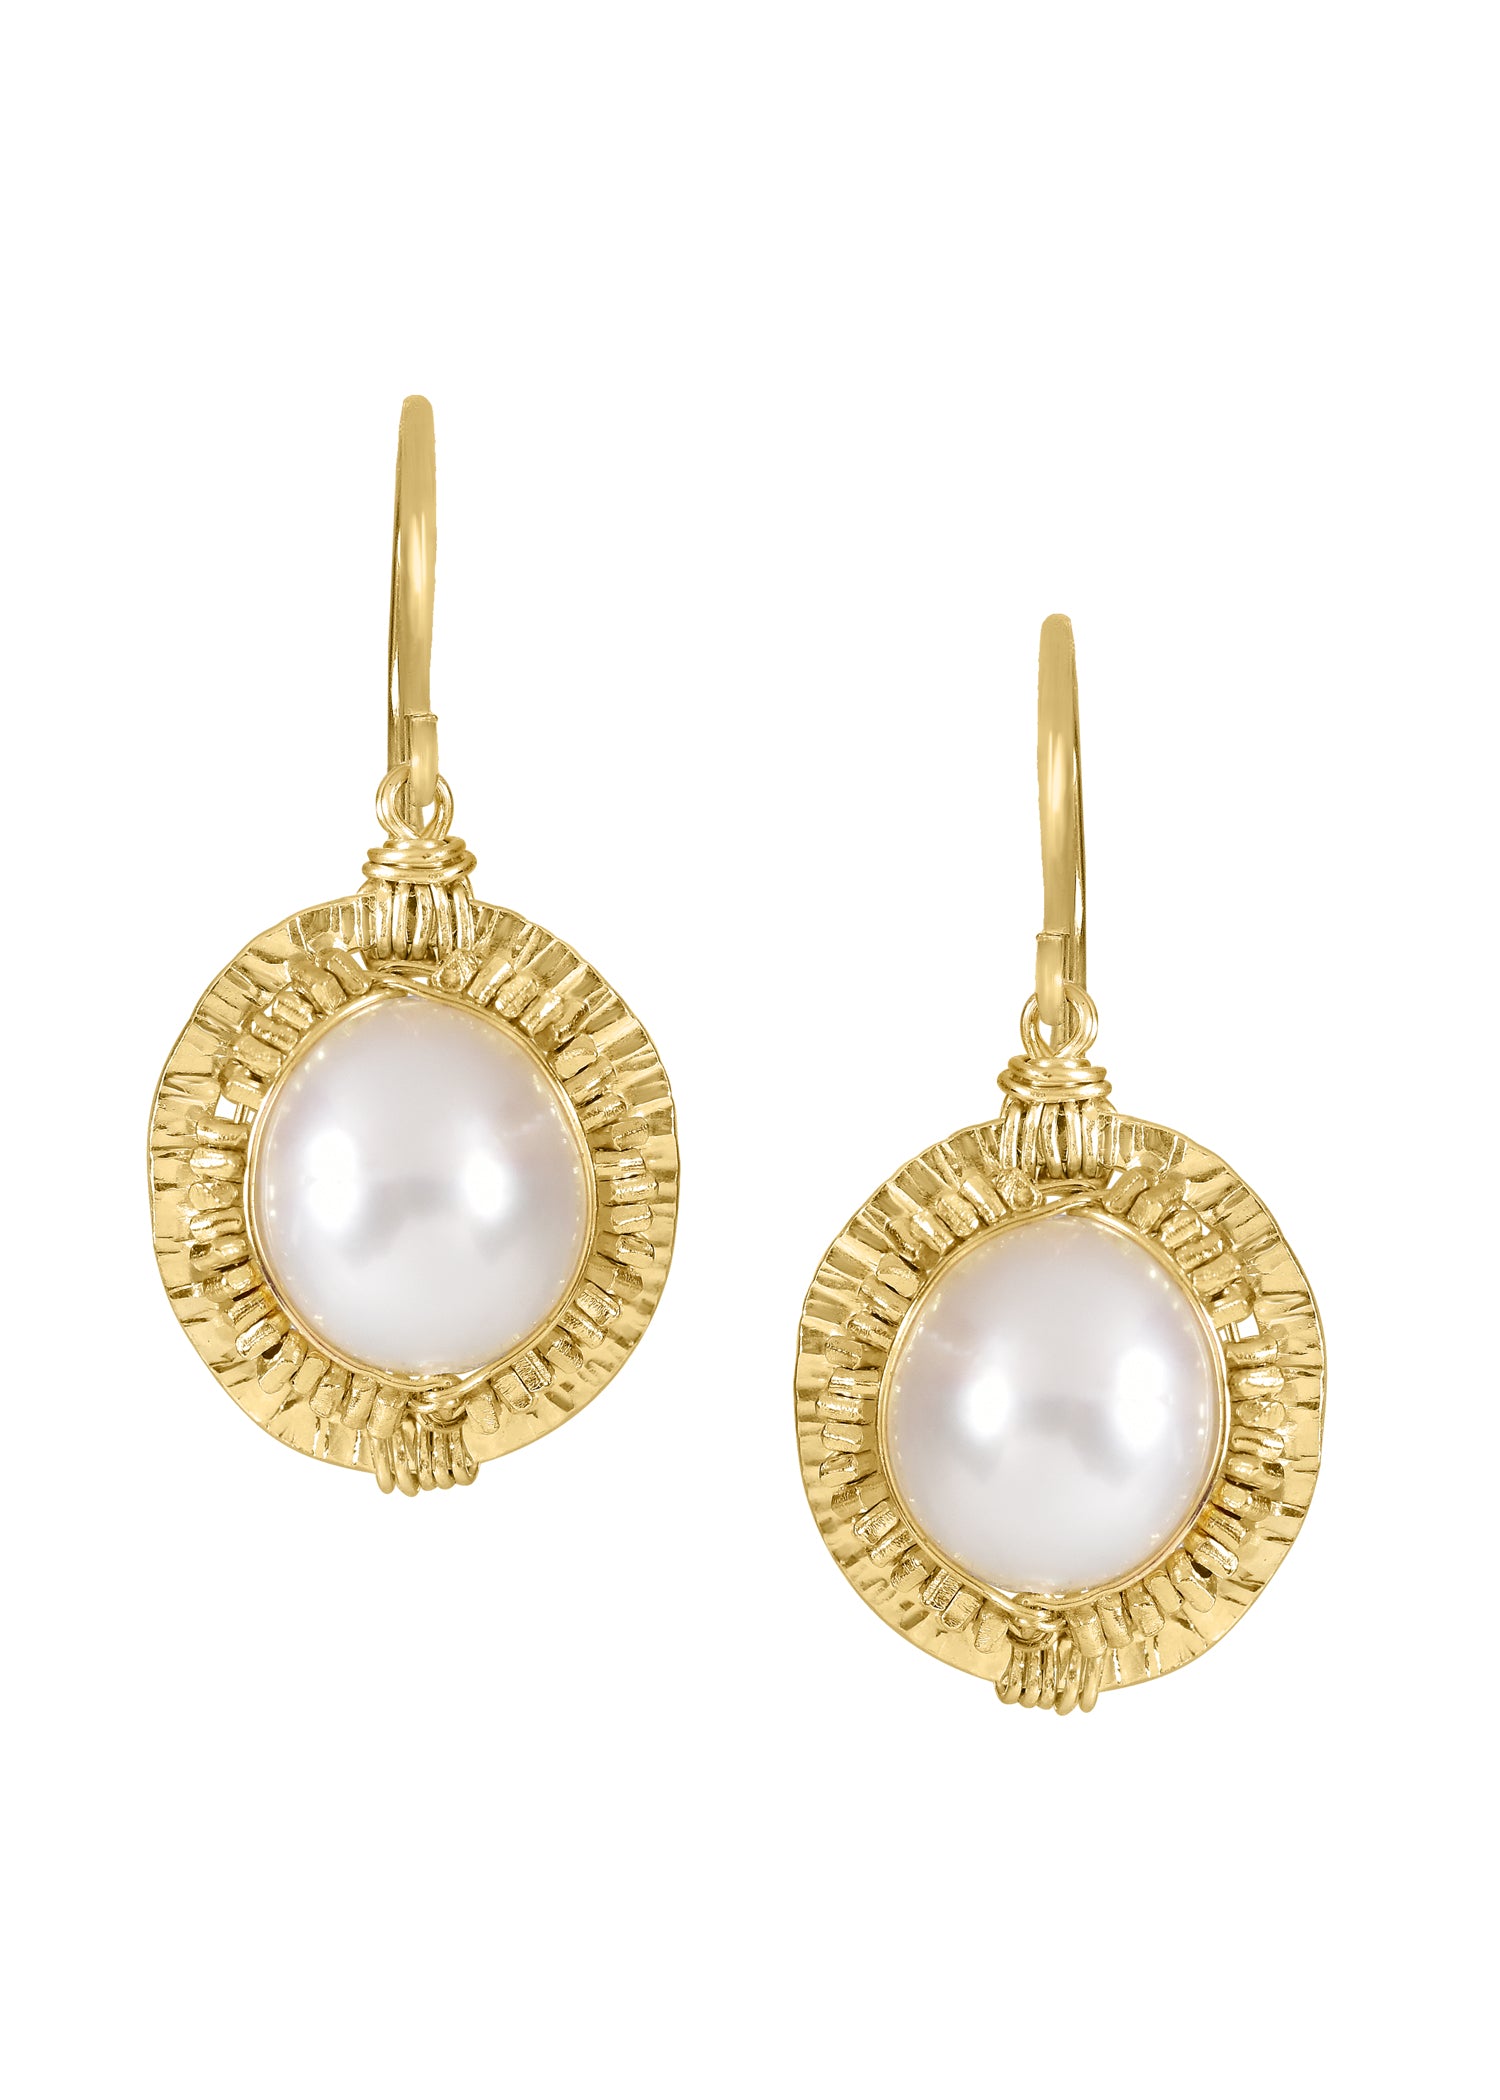 Freshwater pearl 14k gold fill 14k gold vermeil sterling silver beads Earrings measure at 1" in length (including the ear wires) and 1/2" in width Handmade in our Los Angeles studio